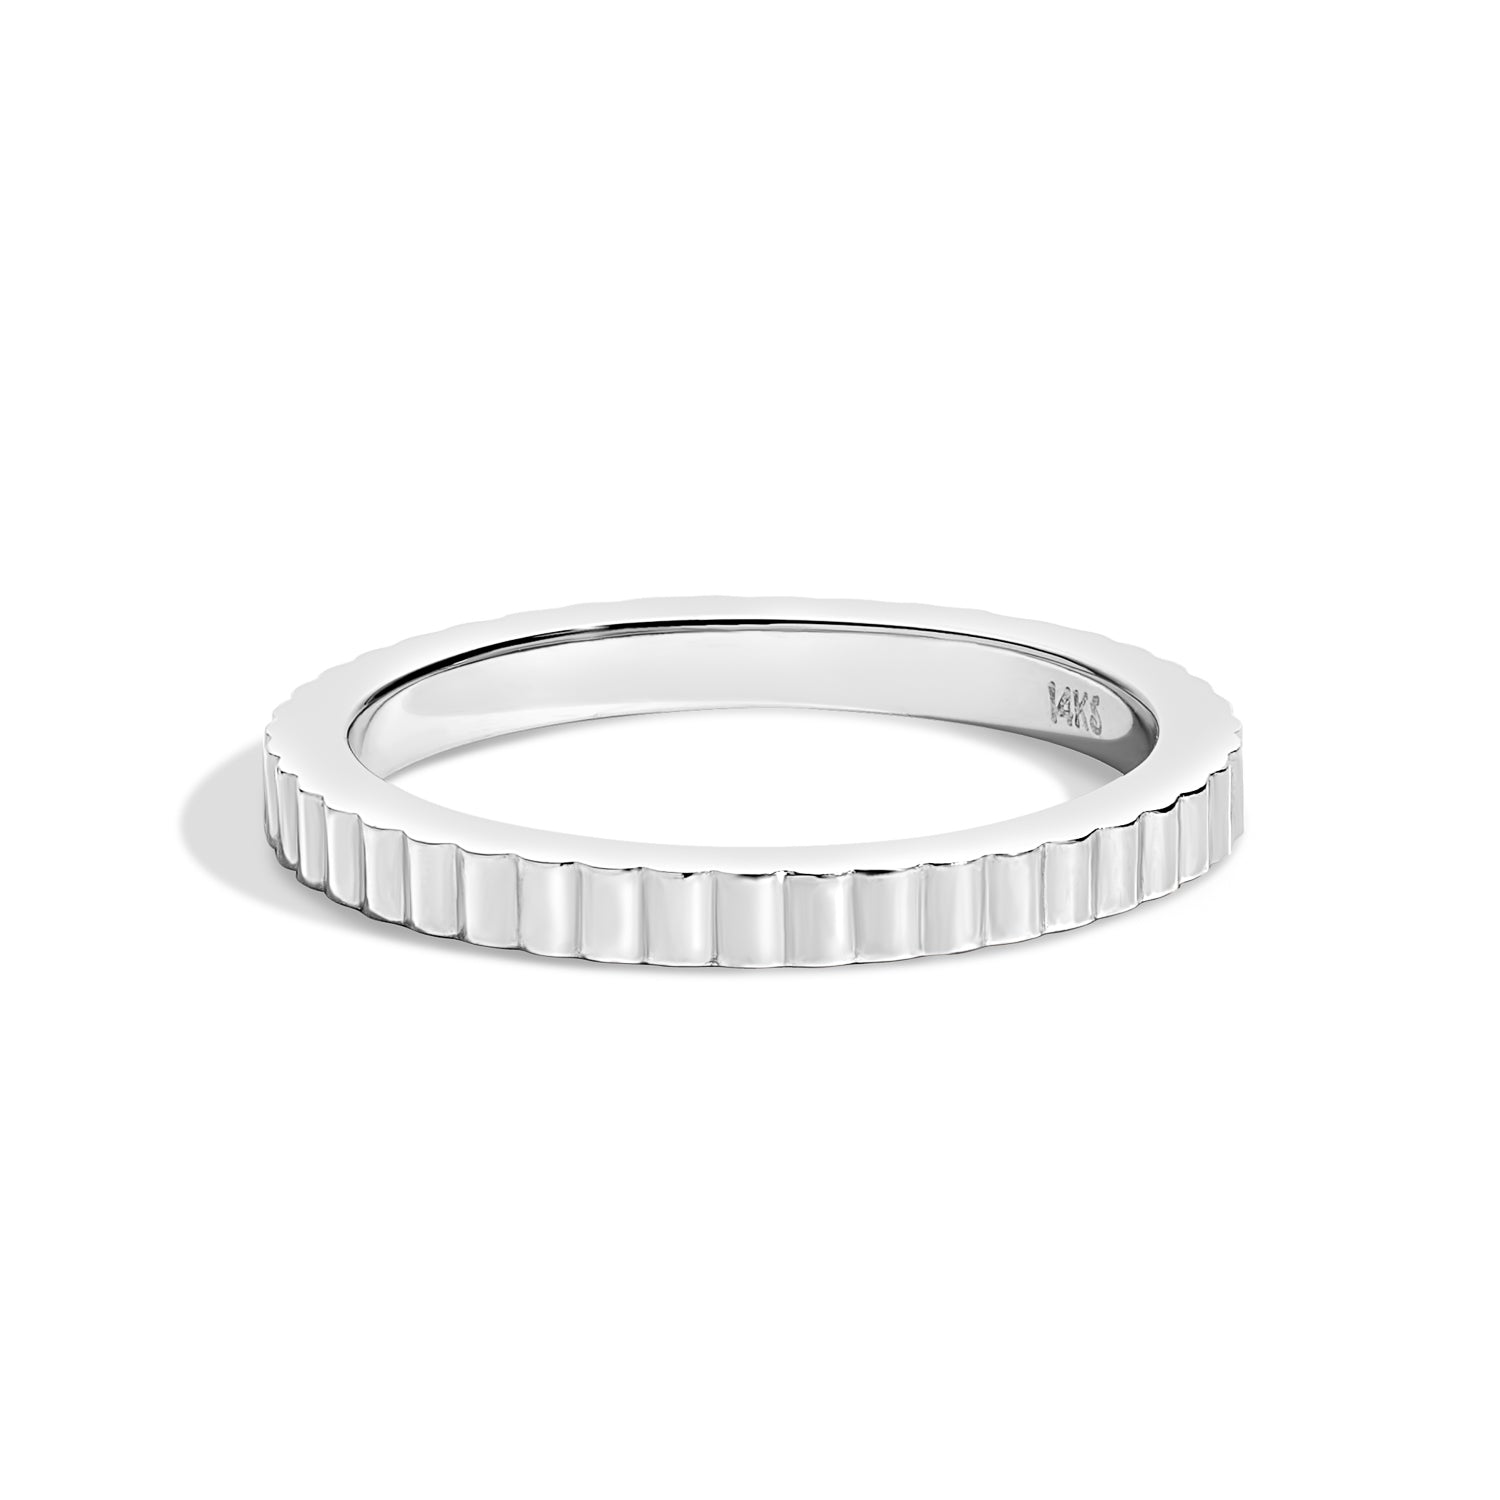 Shahla Karimi Jewelry 2.5mm Grooved Band 14K White Gold